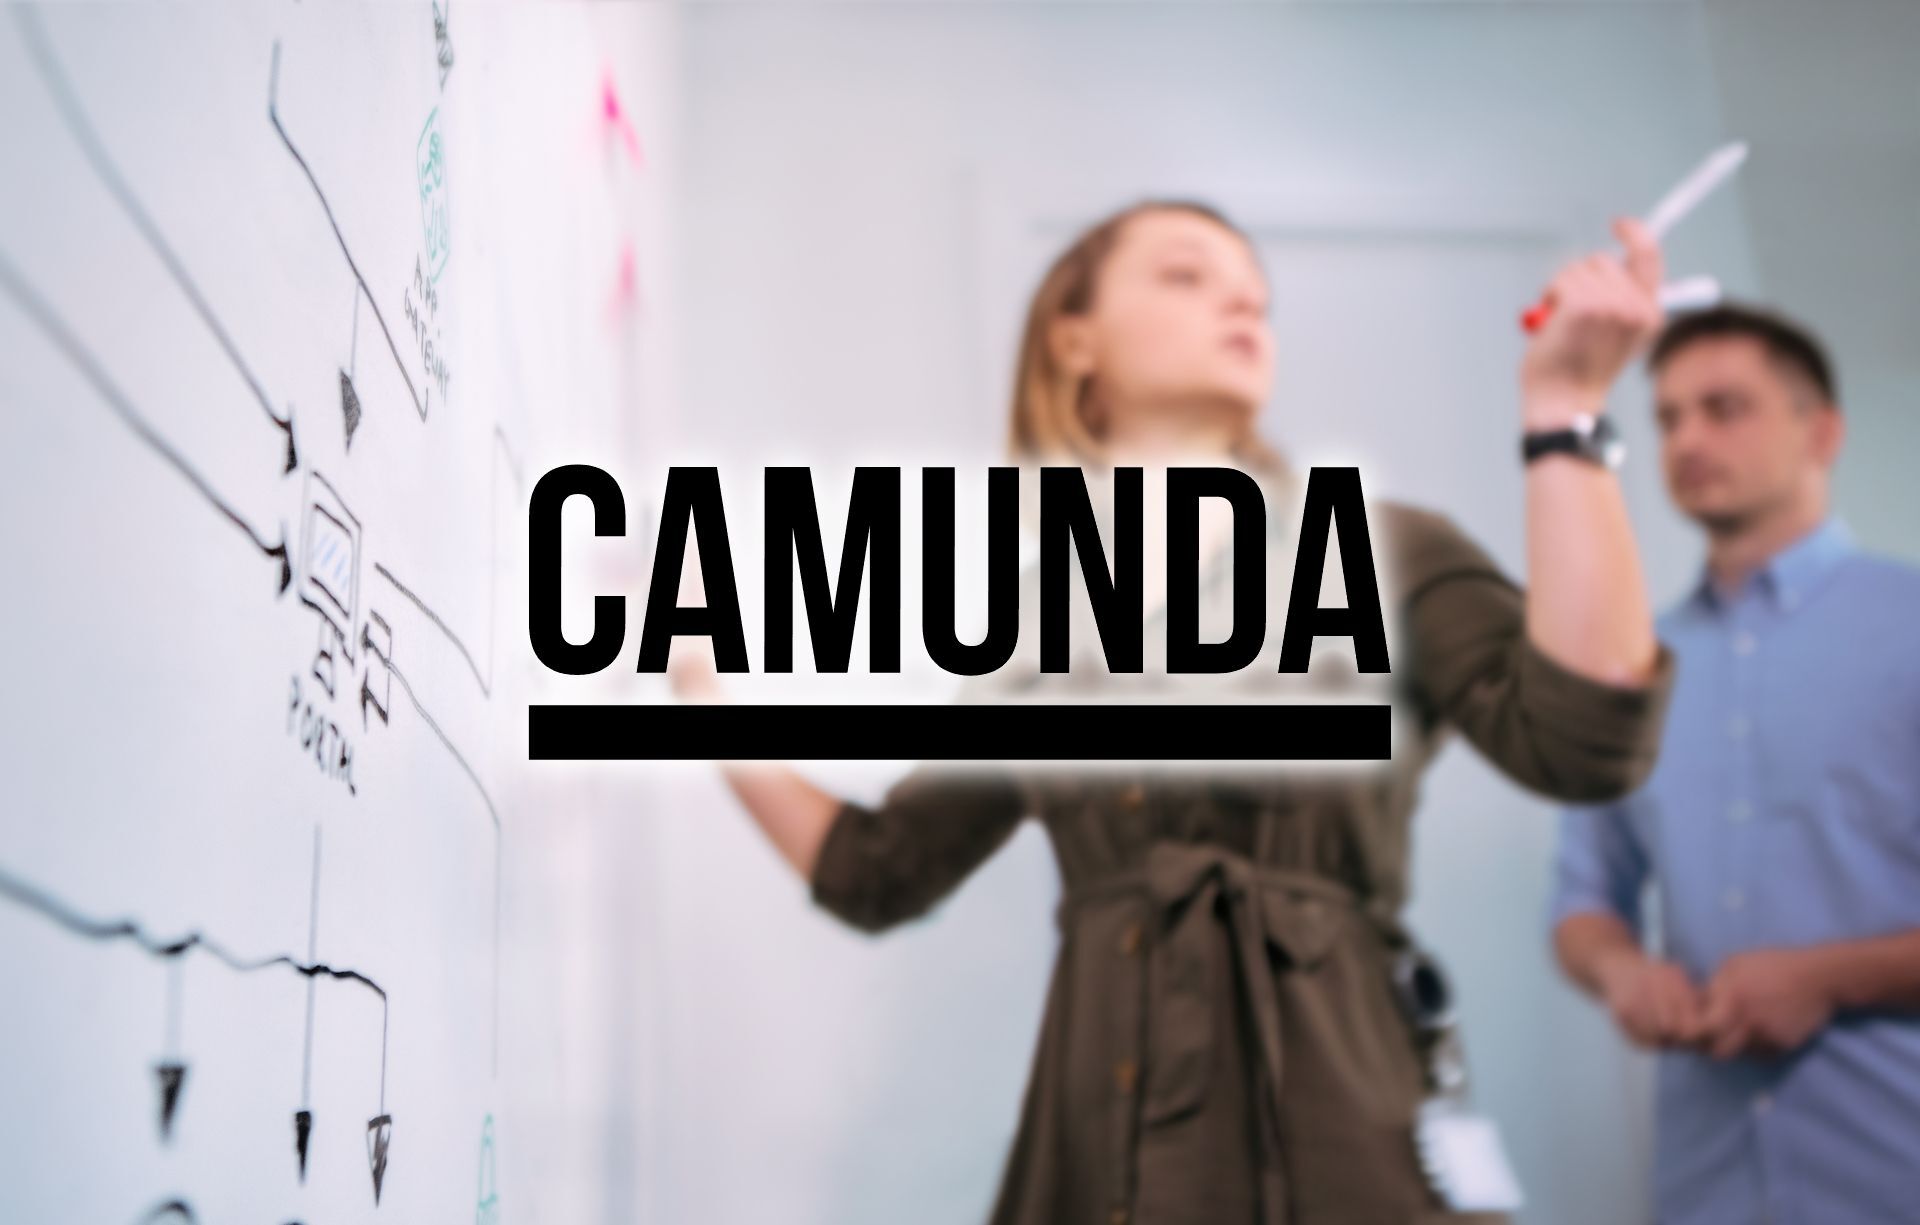 Camunda BPM – We’ve used it in a few business projects and here's what we've learned - Pretius